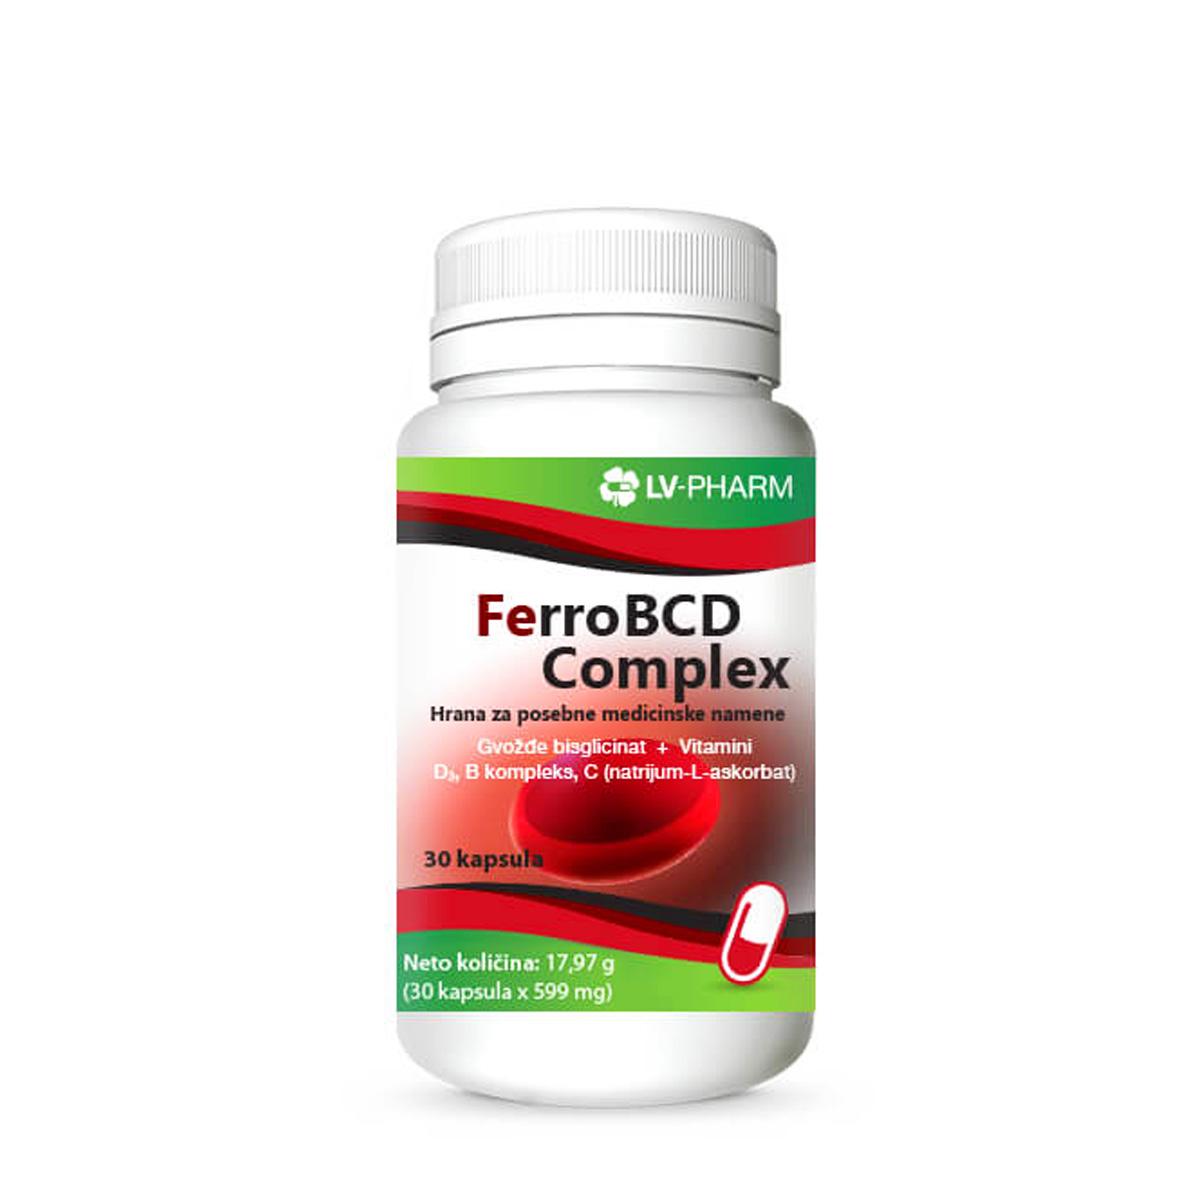 Selected image for FerroBCD Complex 30mg kapsule 30/1